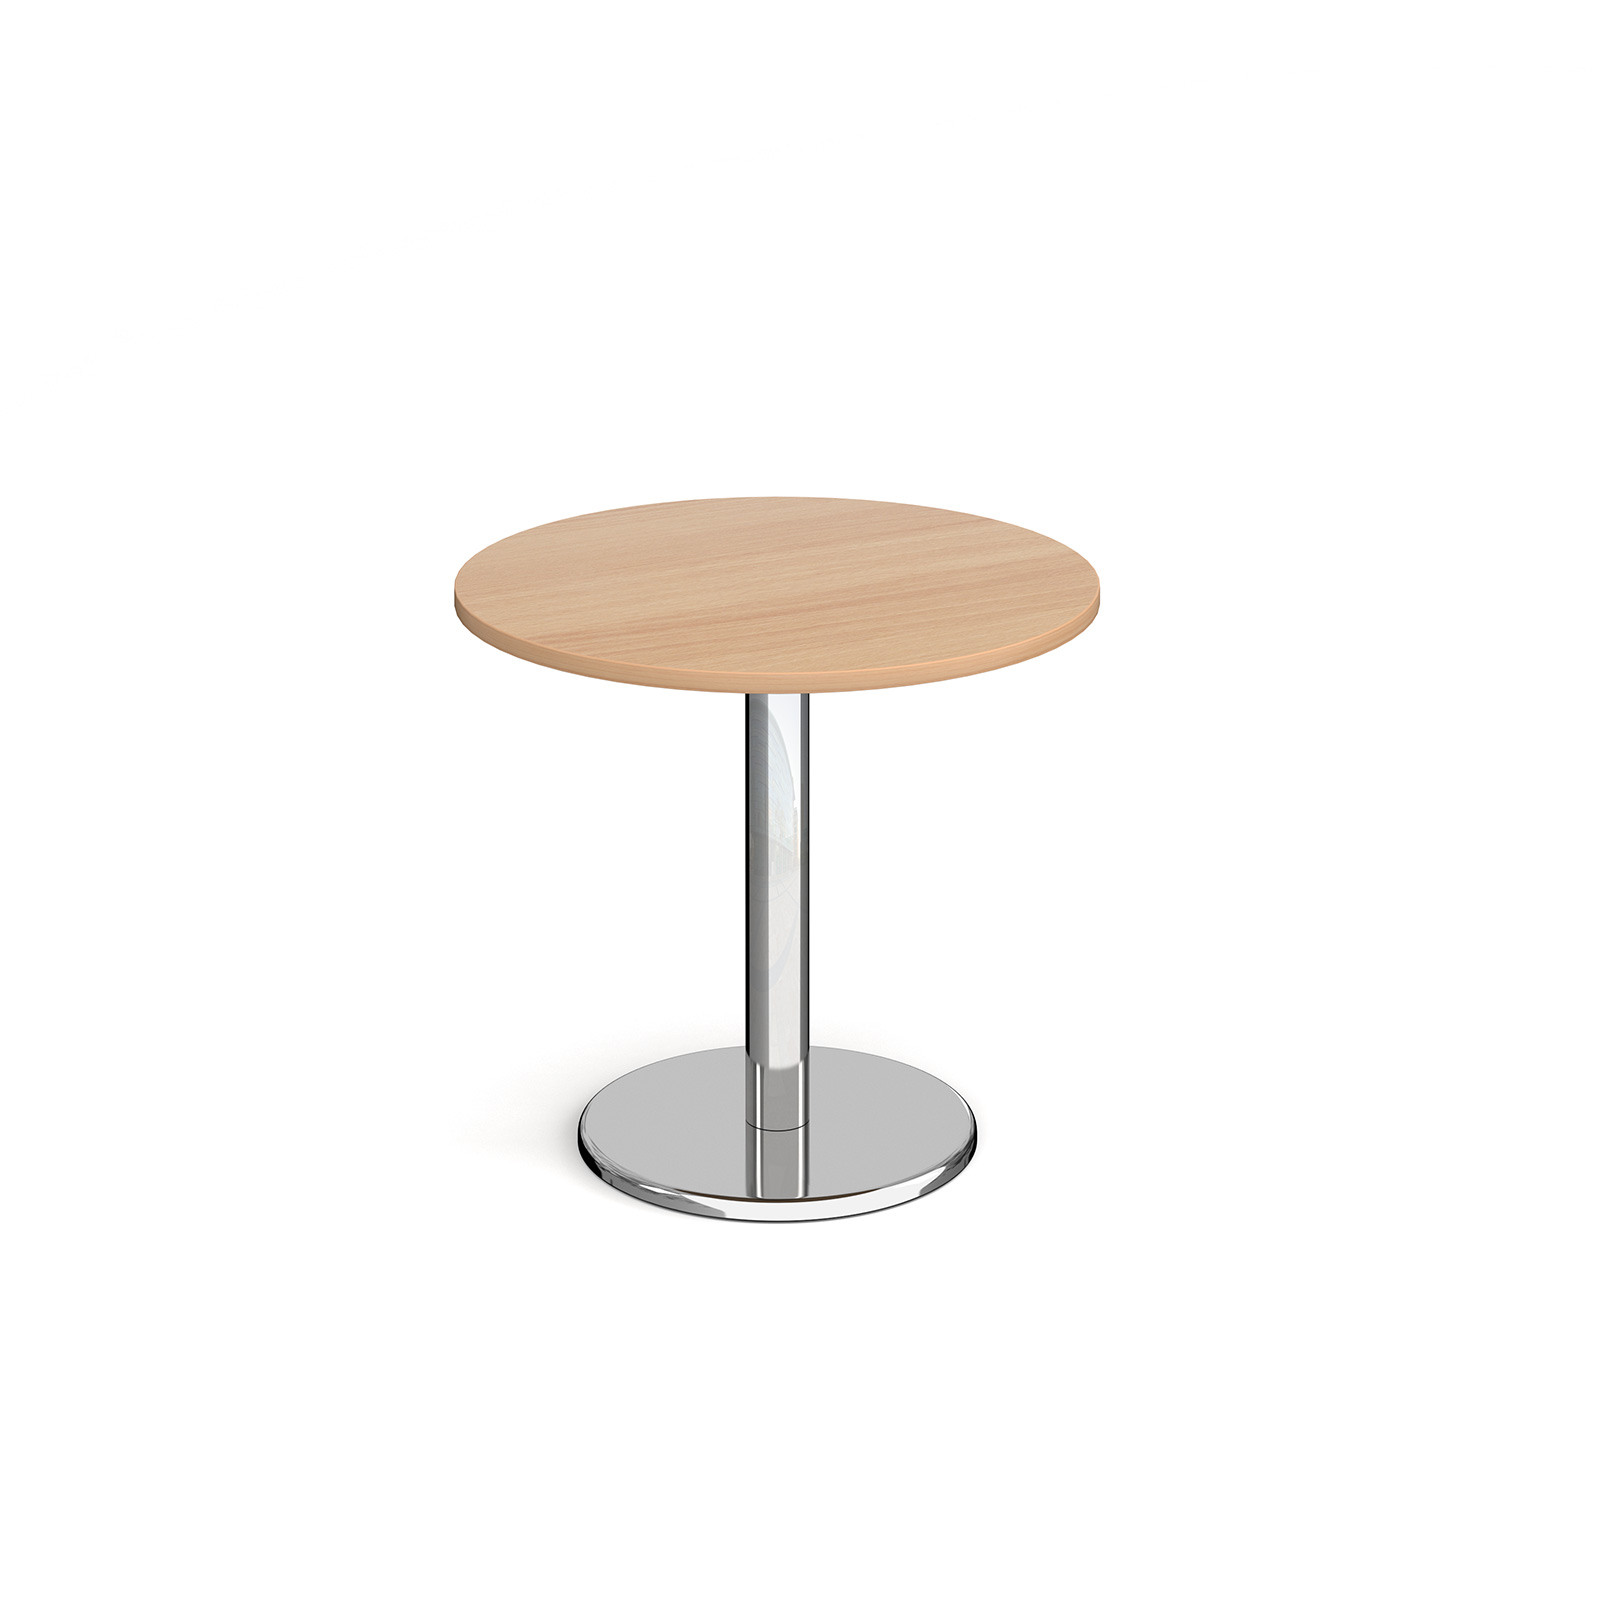 Pisa circular dining table with round chrome base 800mm - beech